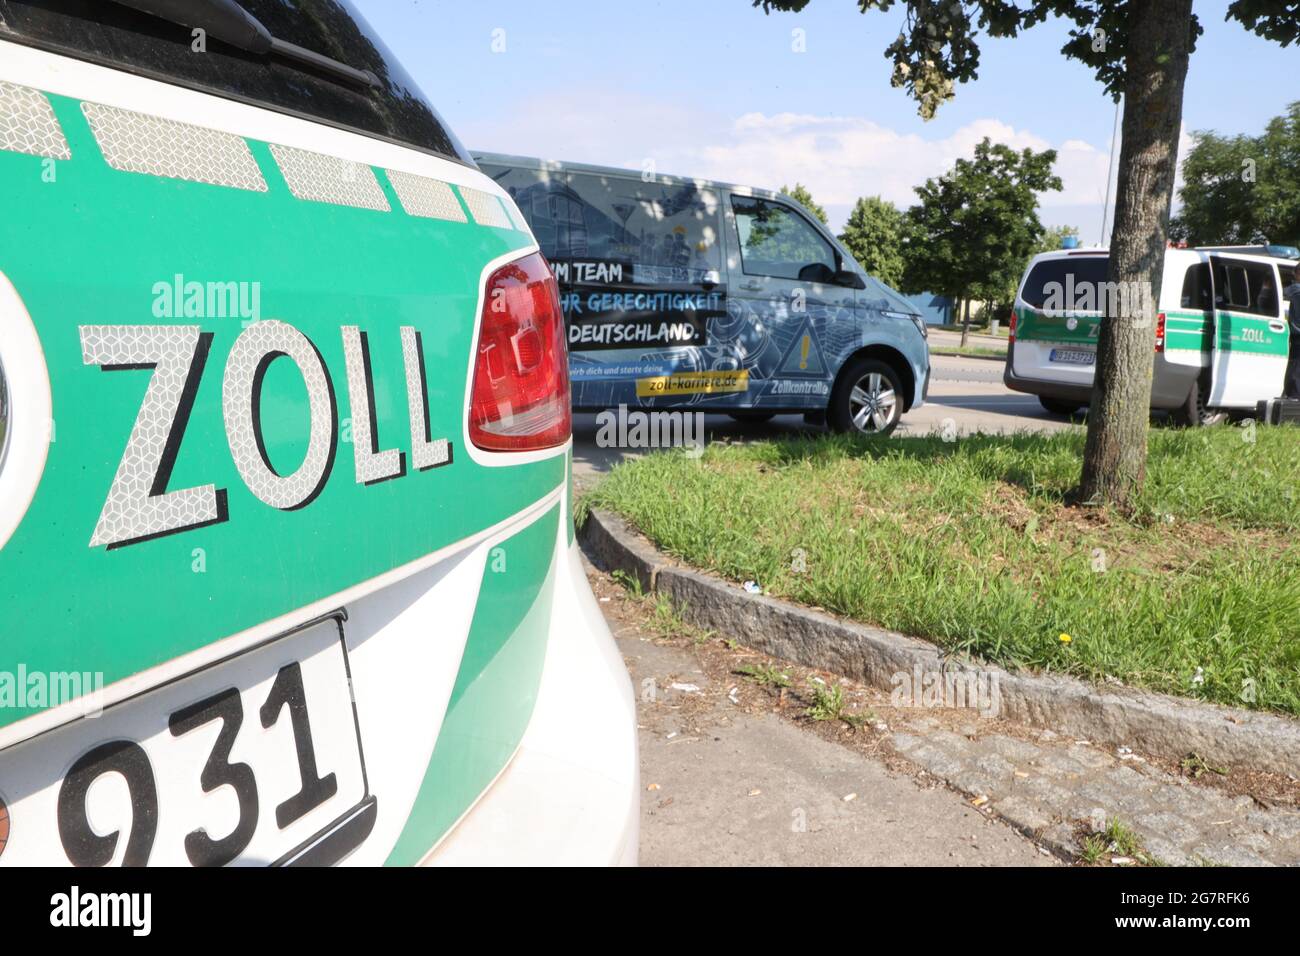 Chemnitz, Germany. 16th July, 2021. Customs service vehicles are parked in a car park on motorway 4. During a nationwide customs inspection, compliance with goods transport regulations and social regulations is checked in particular. Credit: Bodo Schackow/dpa-Zentralbild/dpa/Alamy Live News Stock Photo